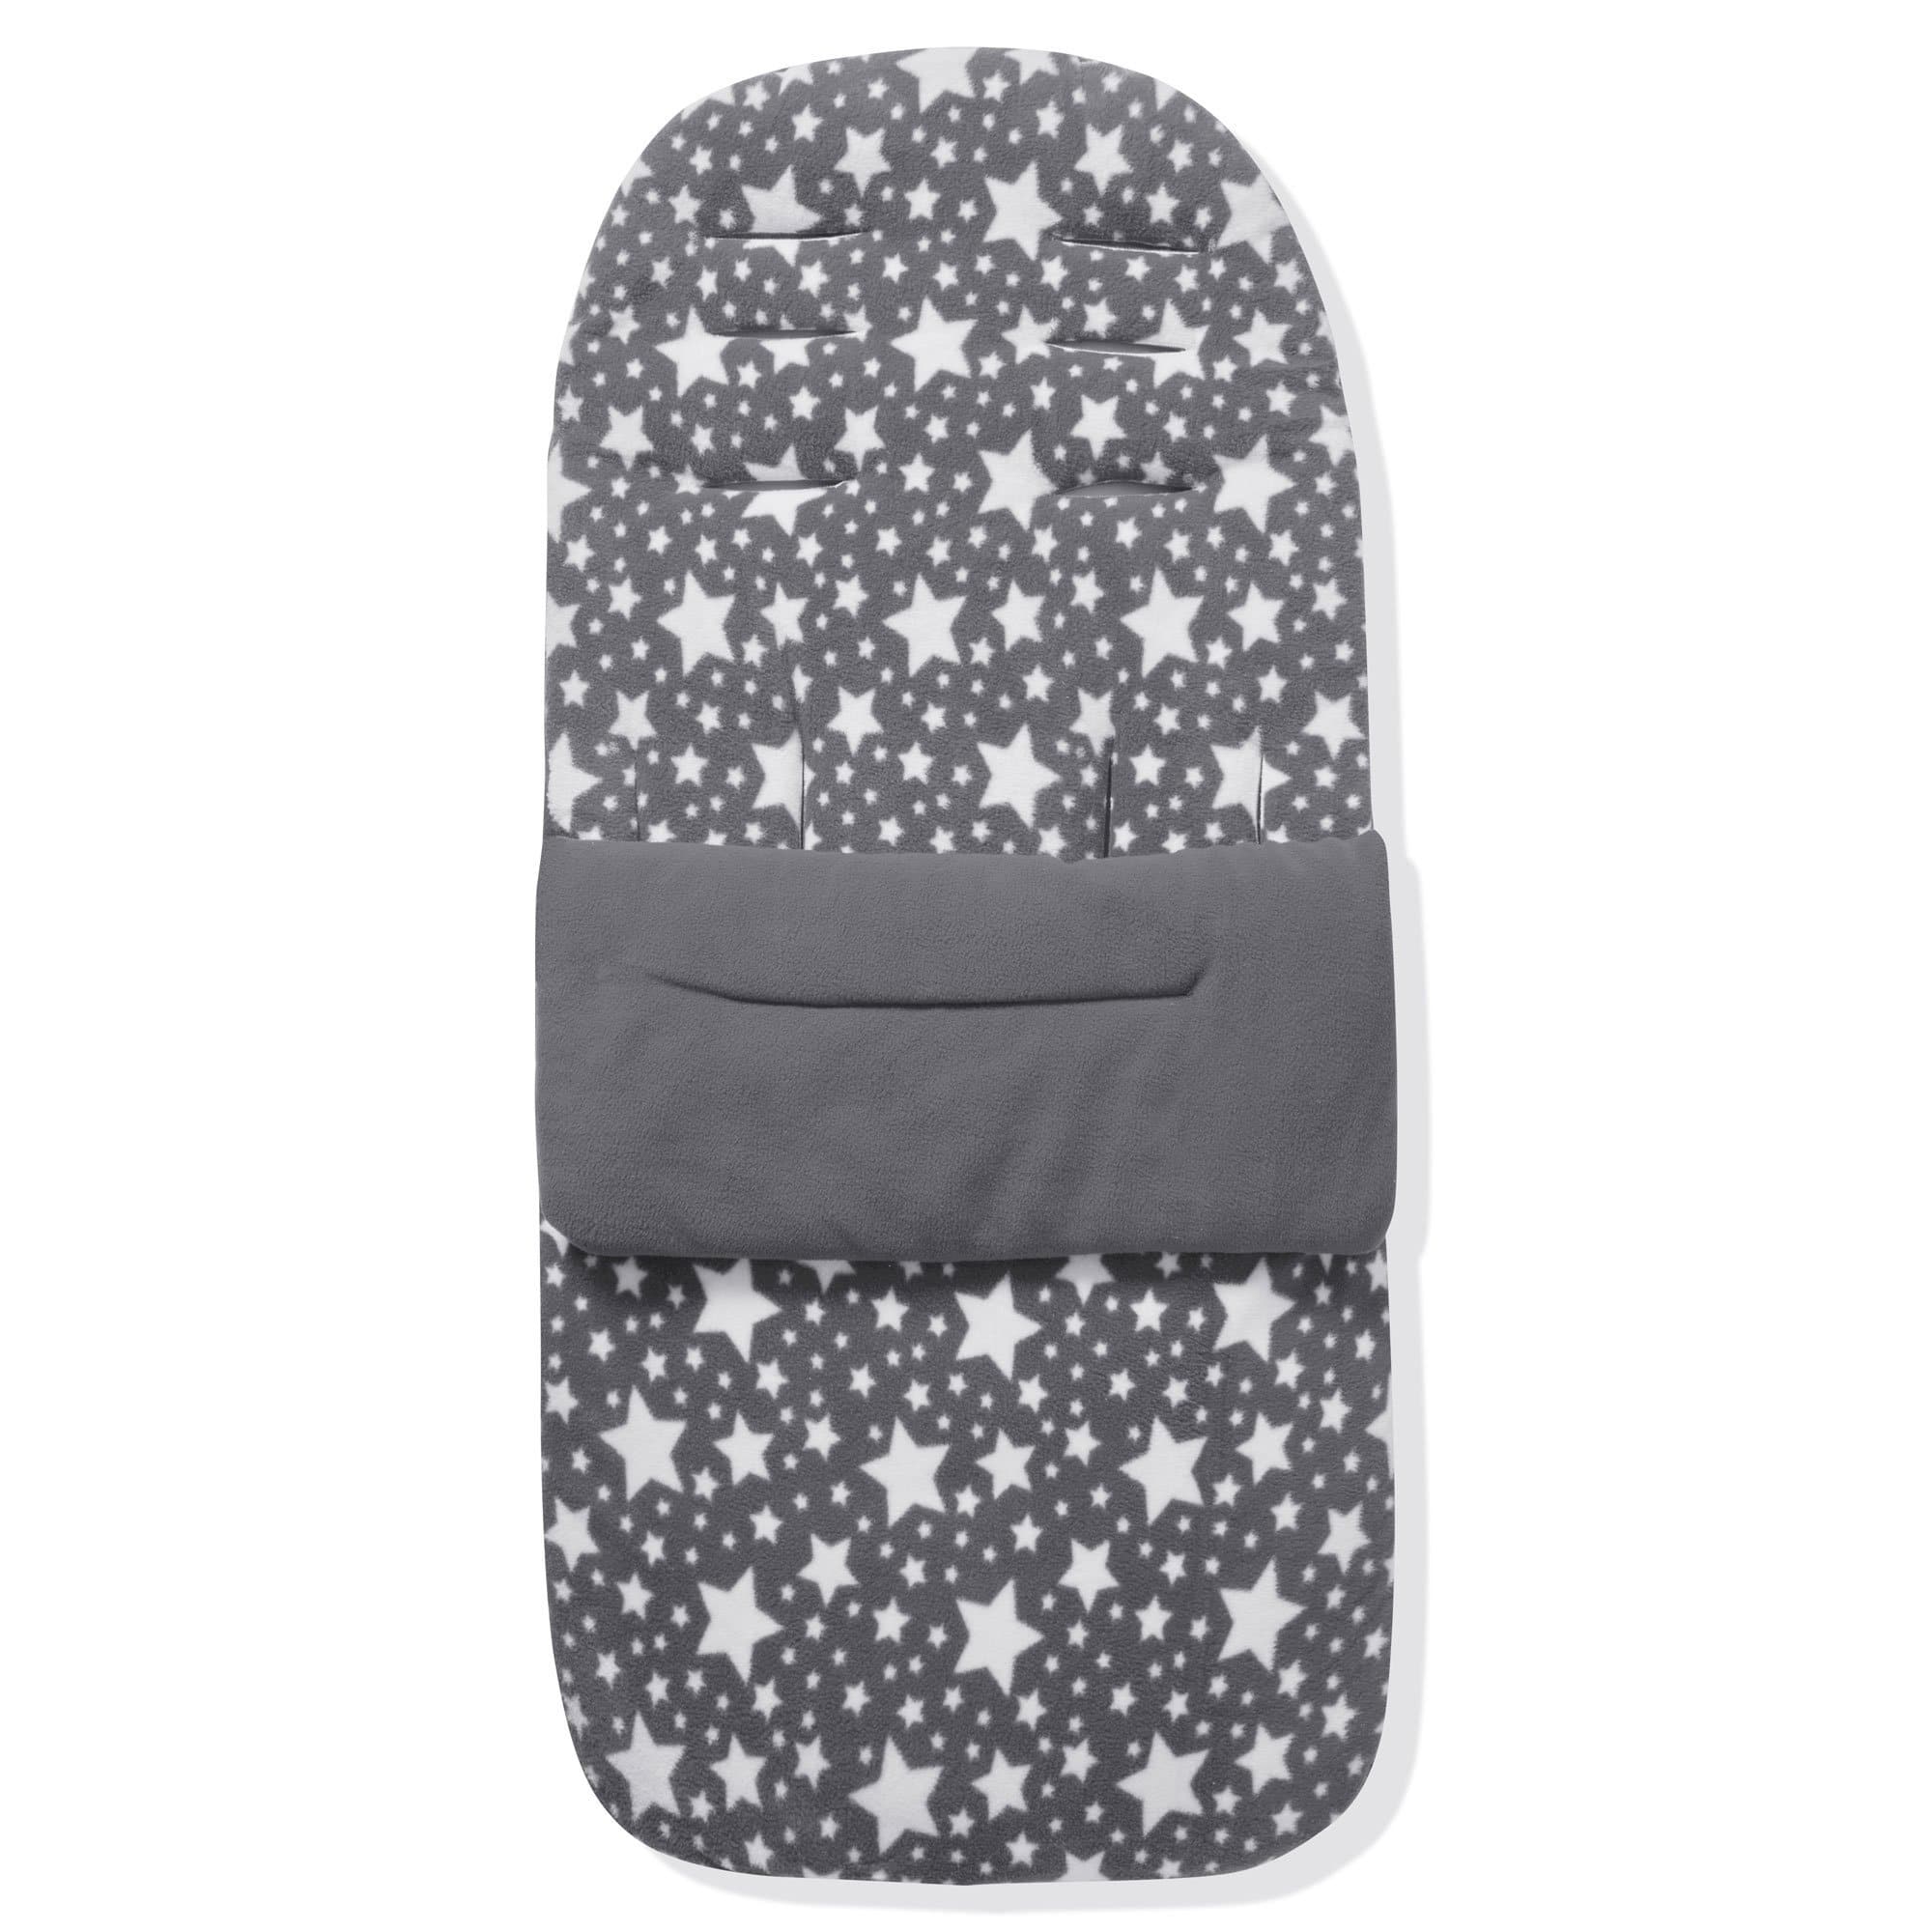 Fleece Footmuff / Cosy Toes Compatible With Cosatto - Grey Star / Fits All Models | For Your Little One